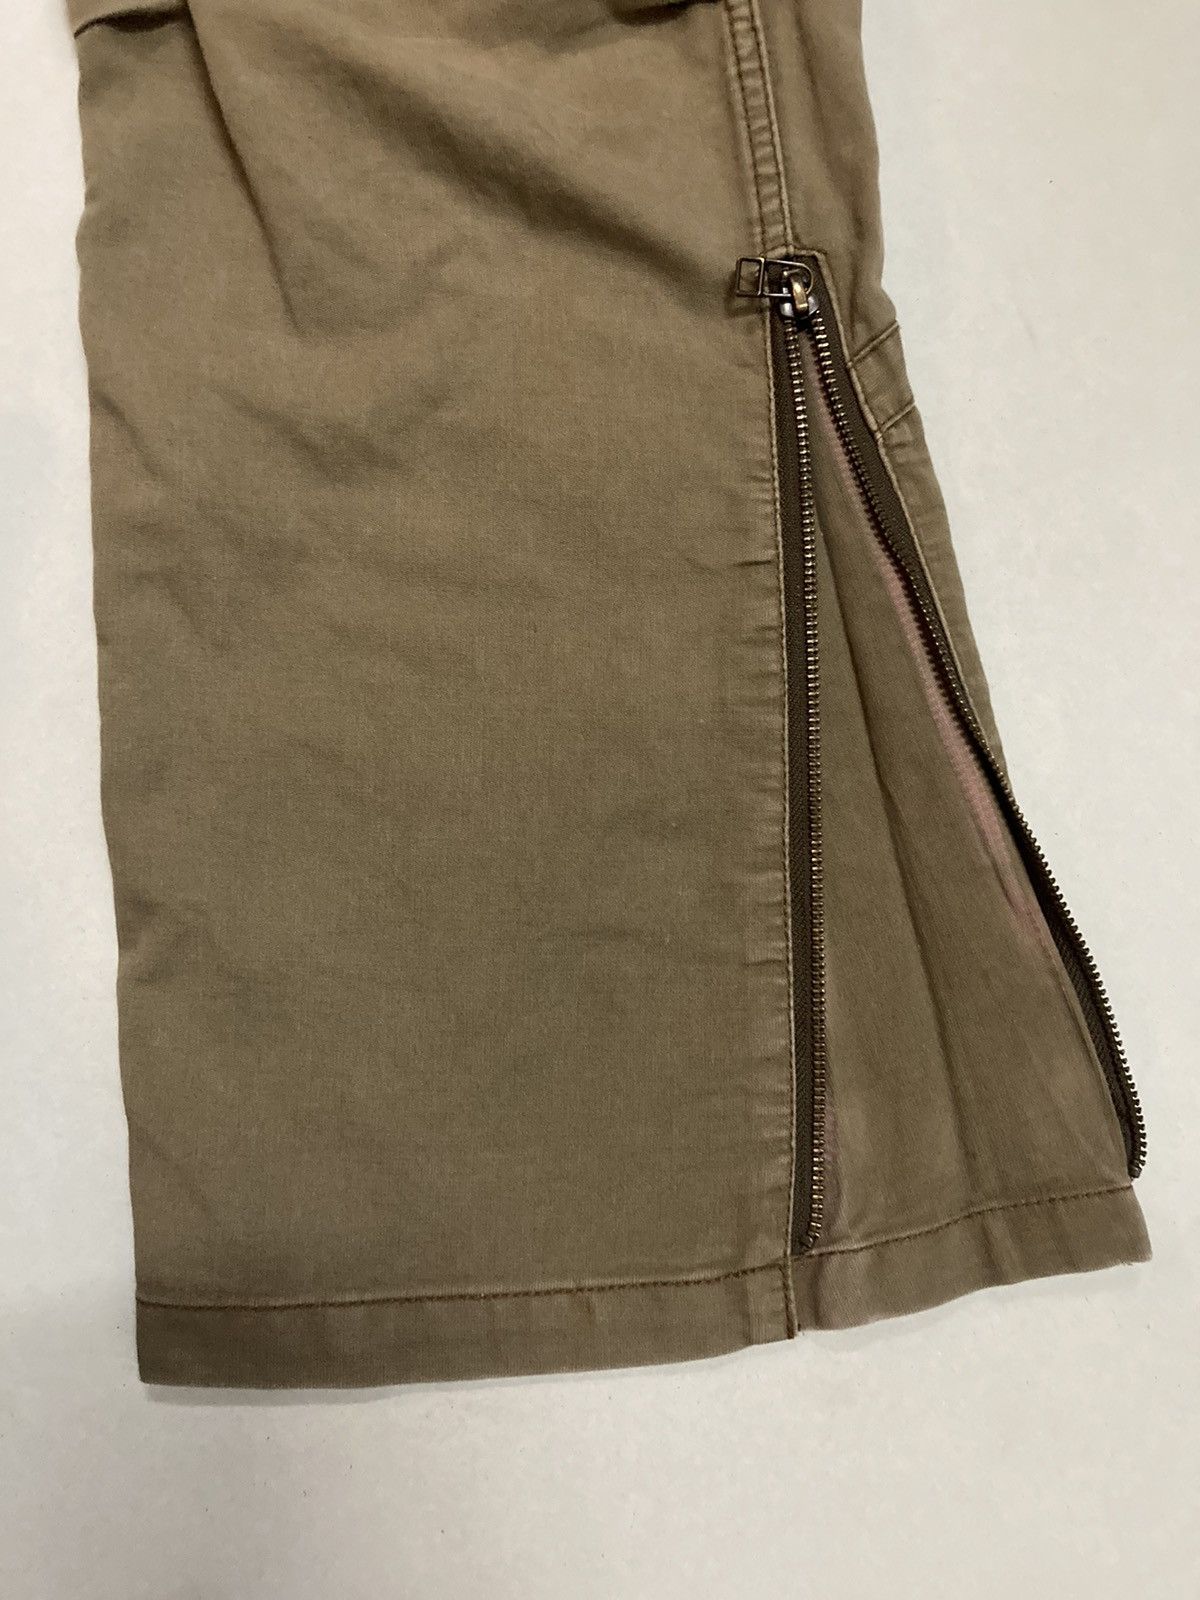 Vintage Soldout Japanese Brand Large Pocket Army Style Pants - 19